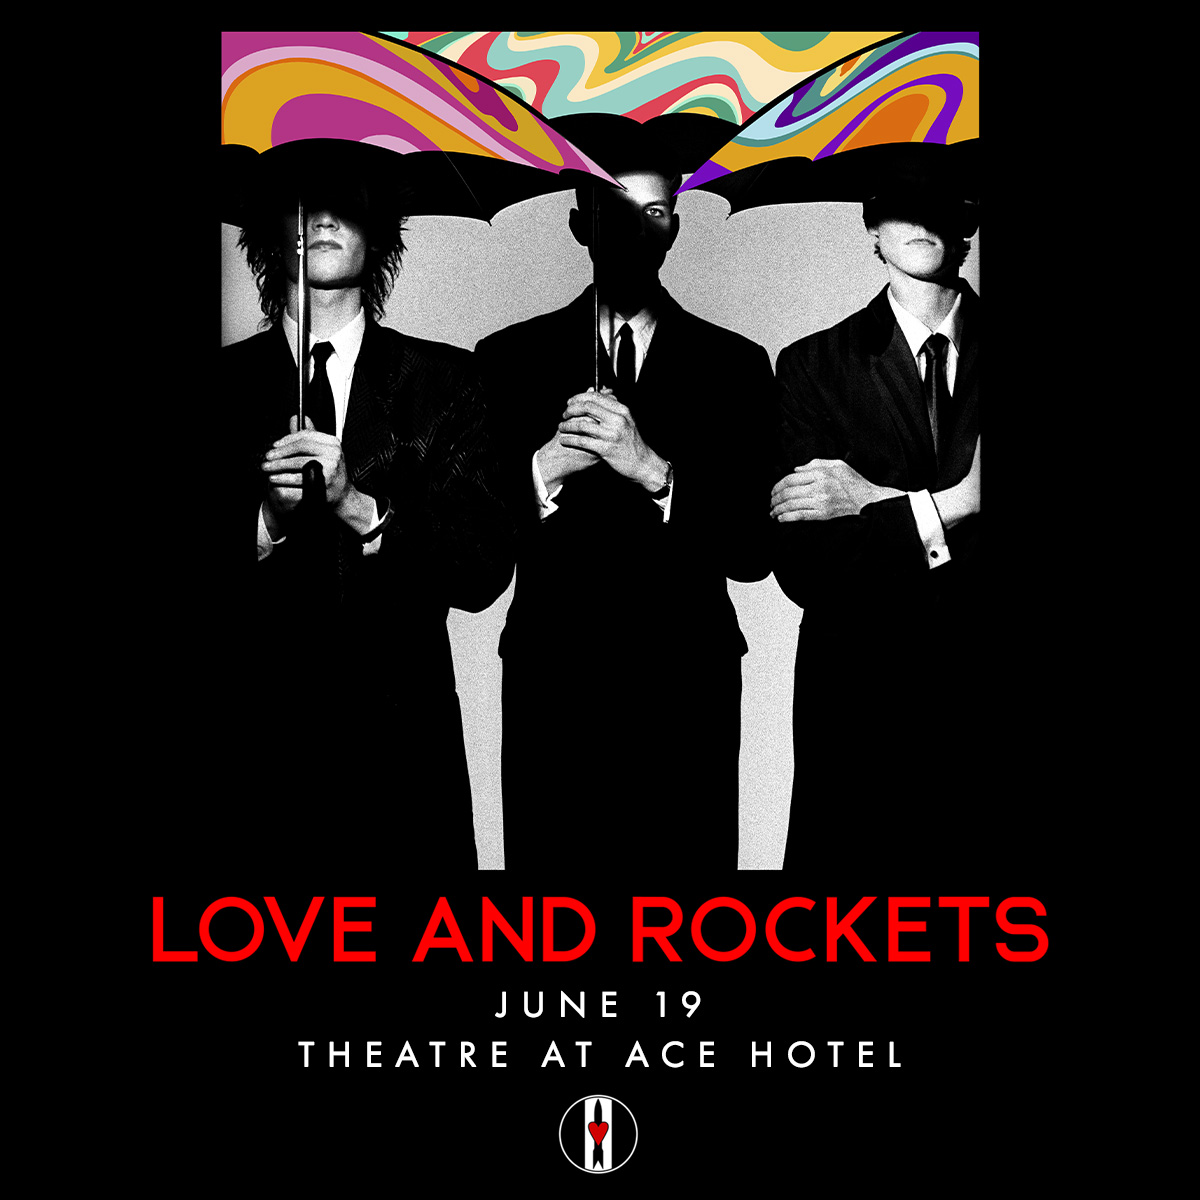 Pictured: Three men pictured in black suits, holding umbrellas with the top of their faces covered. Their faces are covered with the tops of umbrella that are colorful. Bottom Text: Love and Rockets June 19 Theatre at Ace Hotel